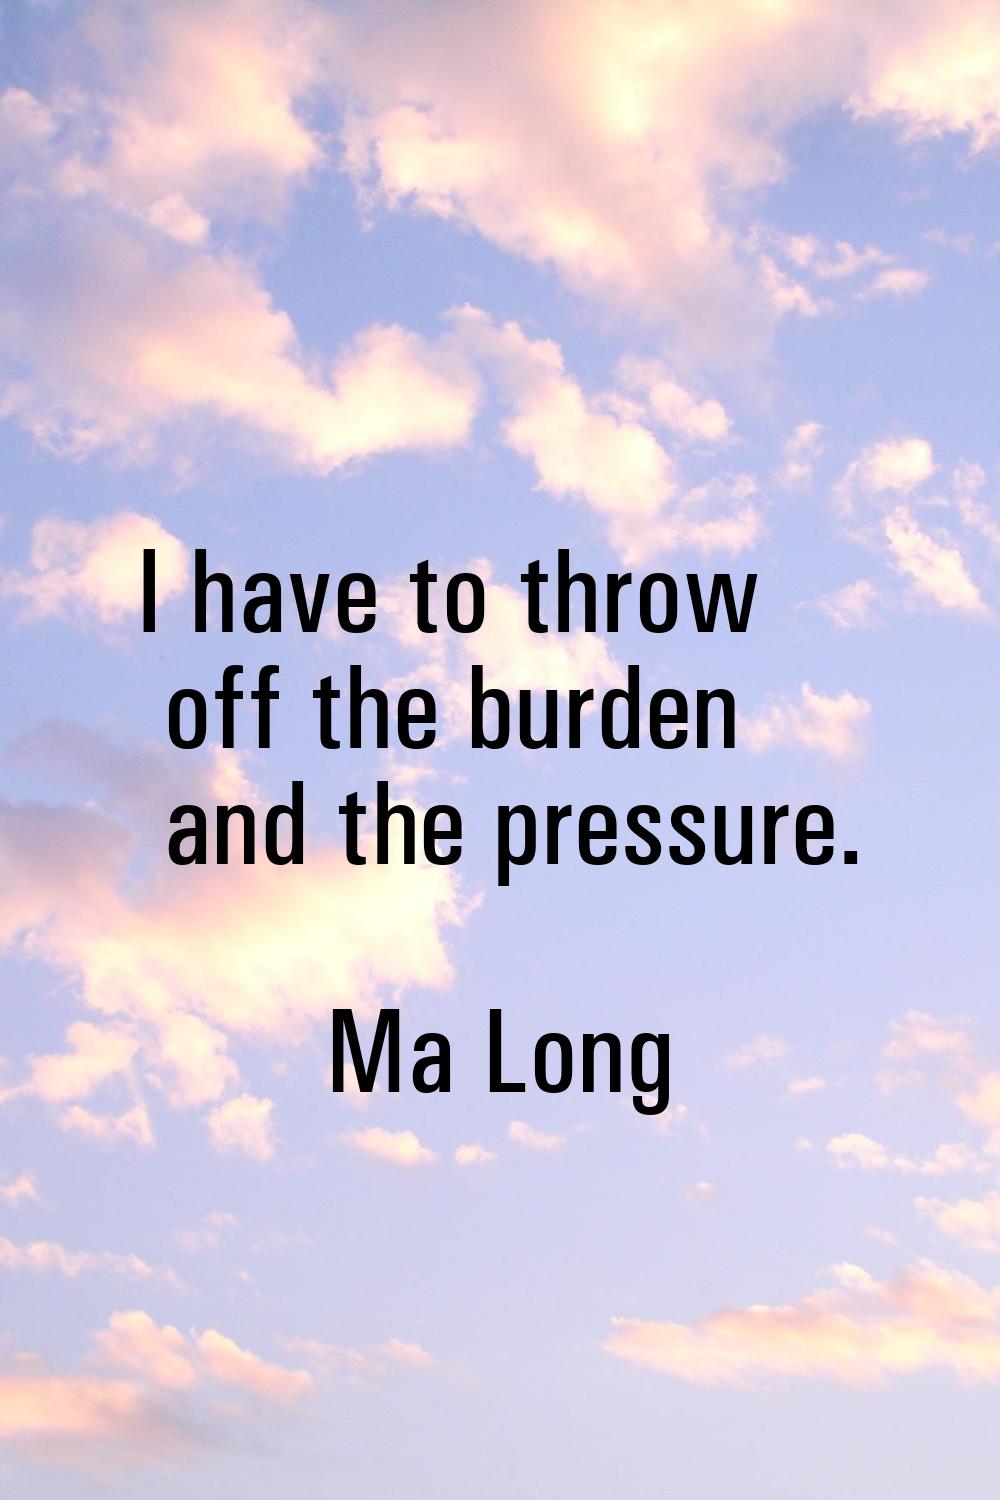 I have to throw off the burden and the pressure.